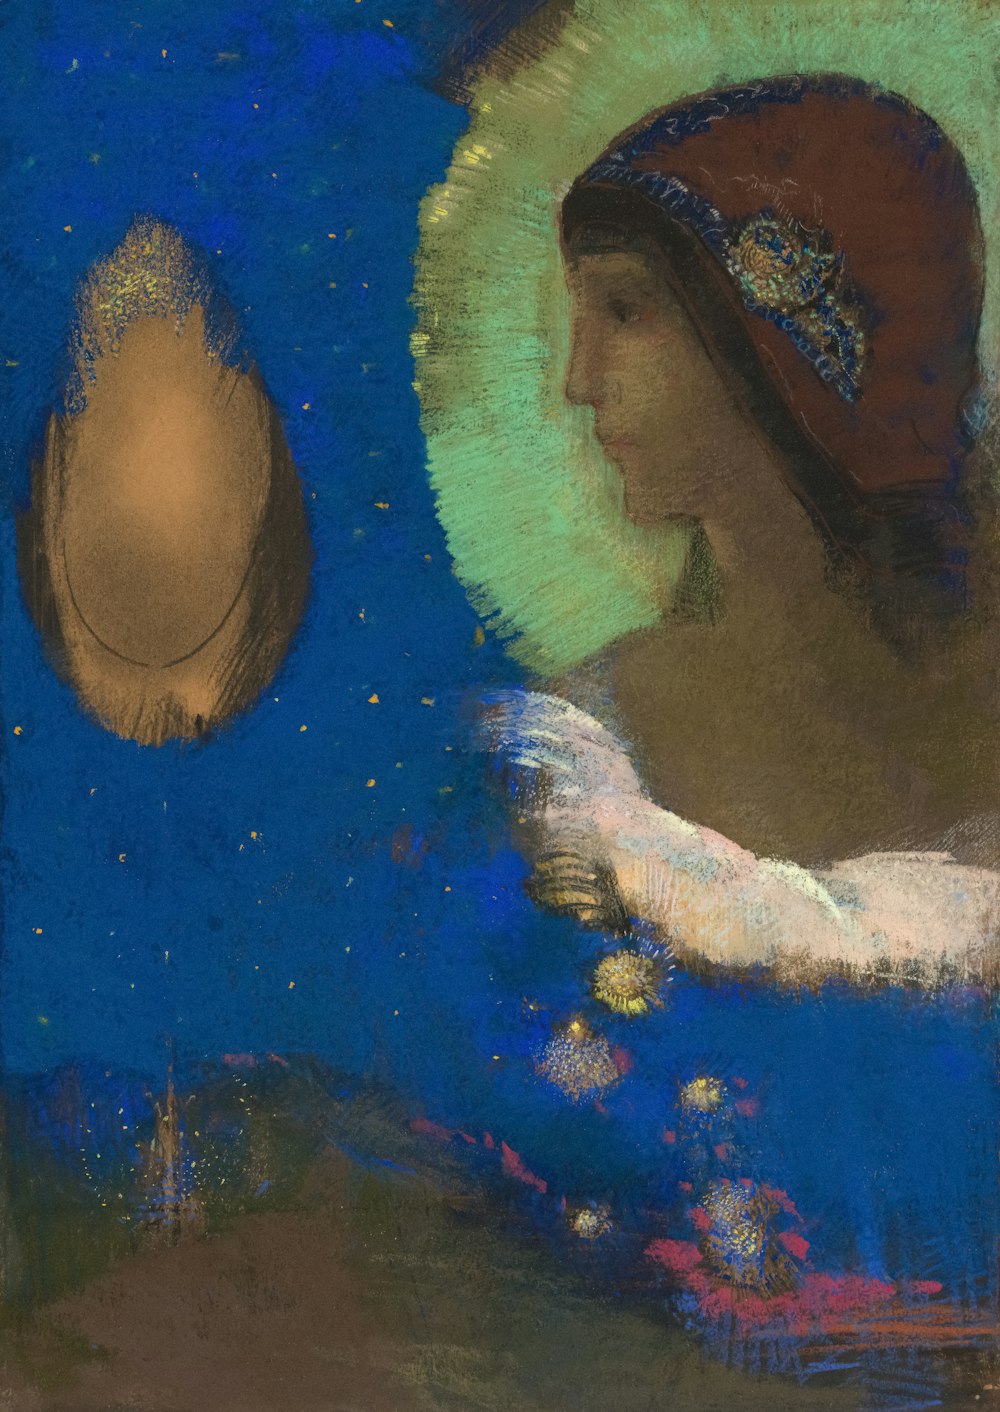 a painting of a woman in a blue dress